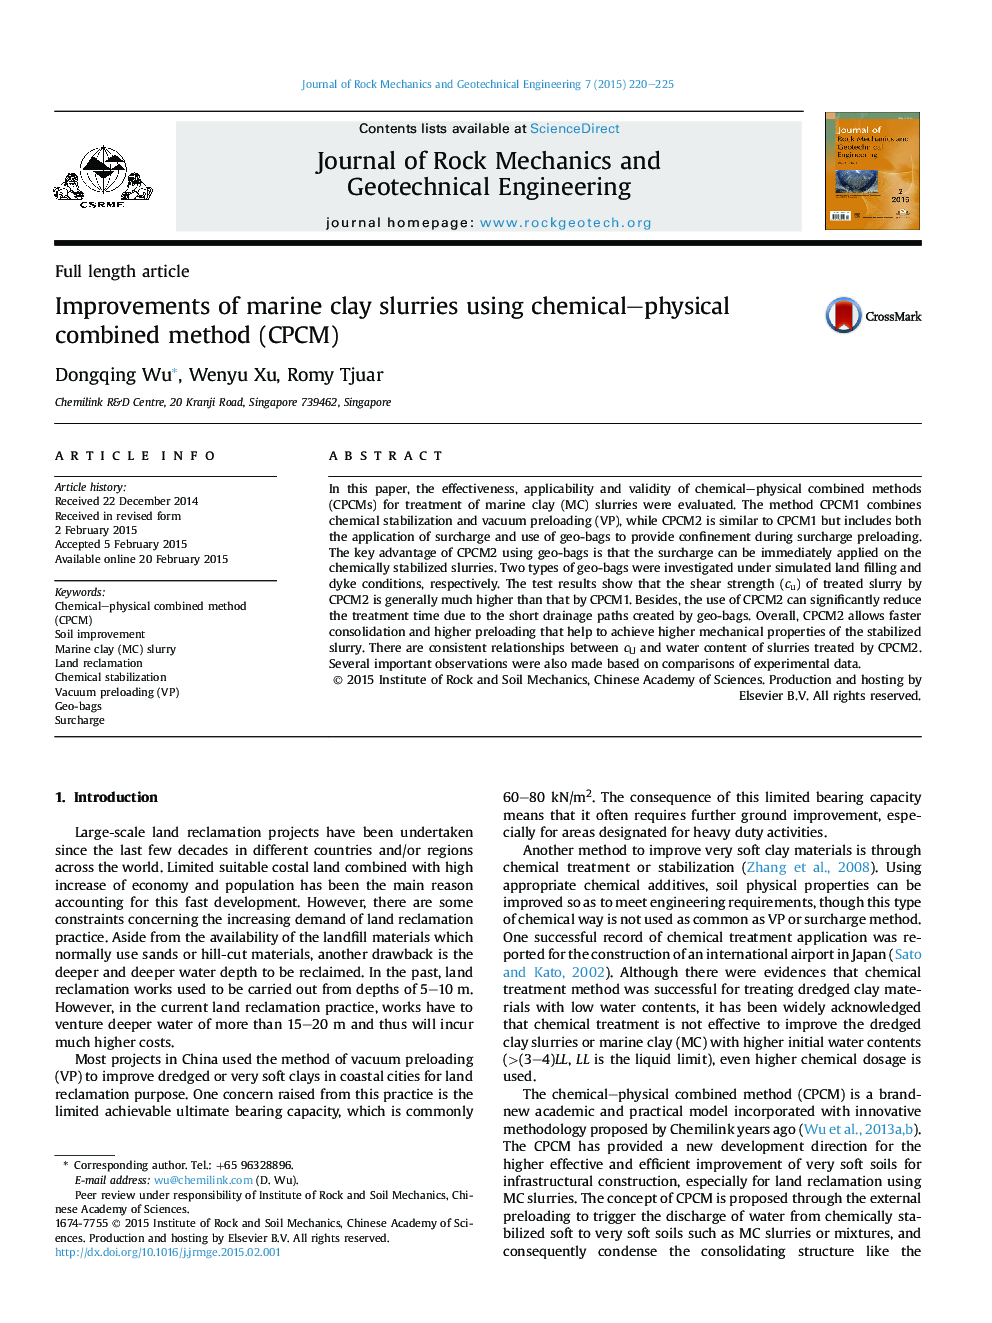 Improvements of marine clay slurries using chemical–physical combined method (CPCM) 